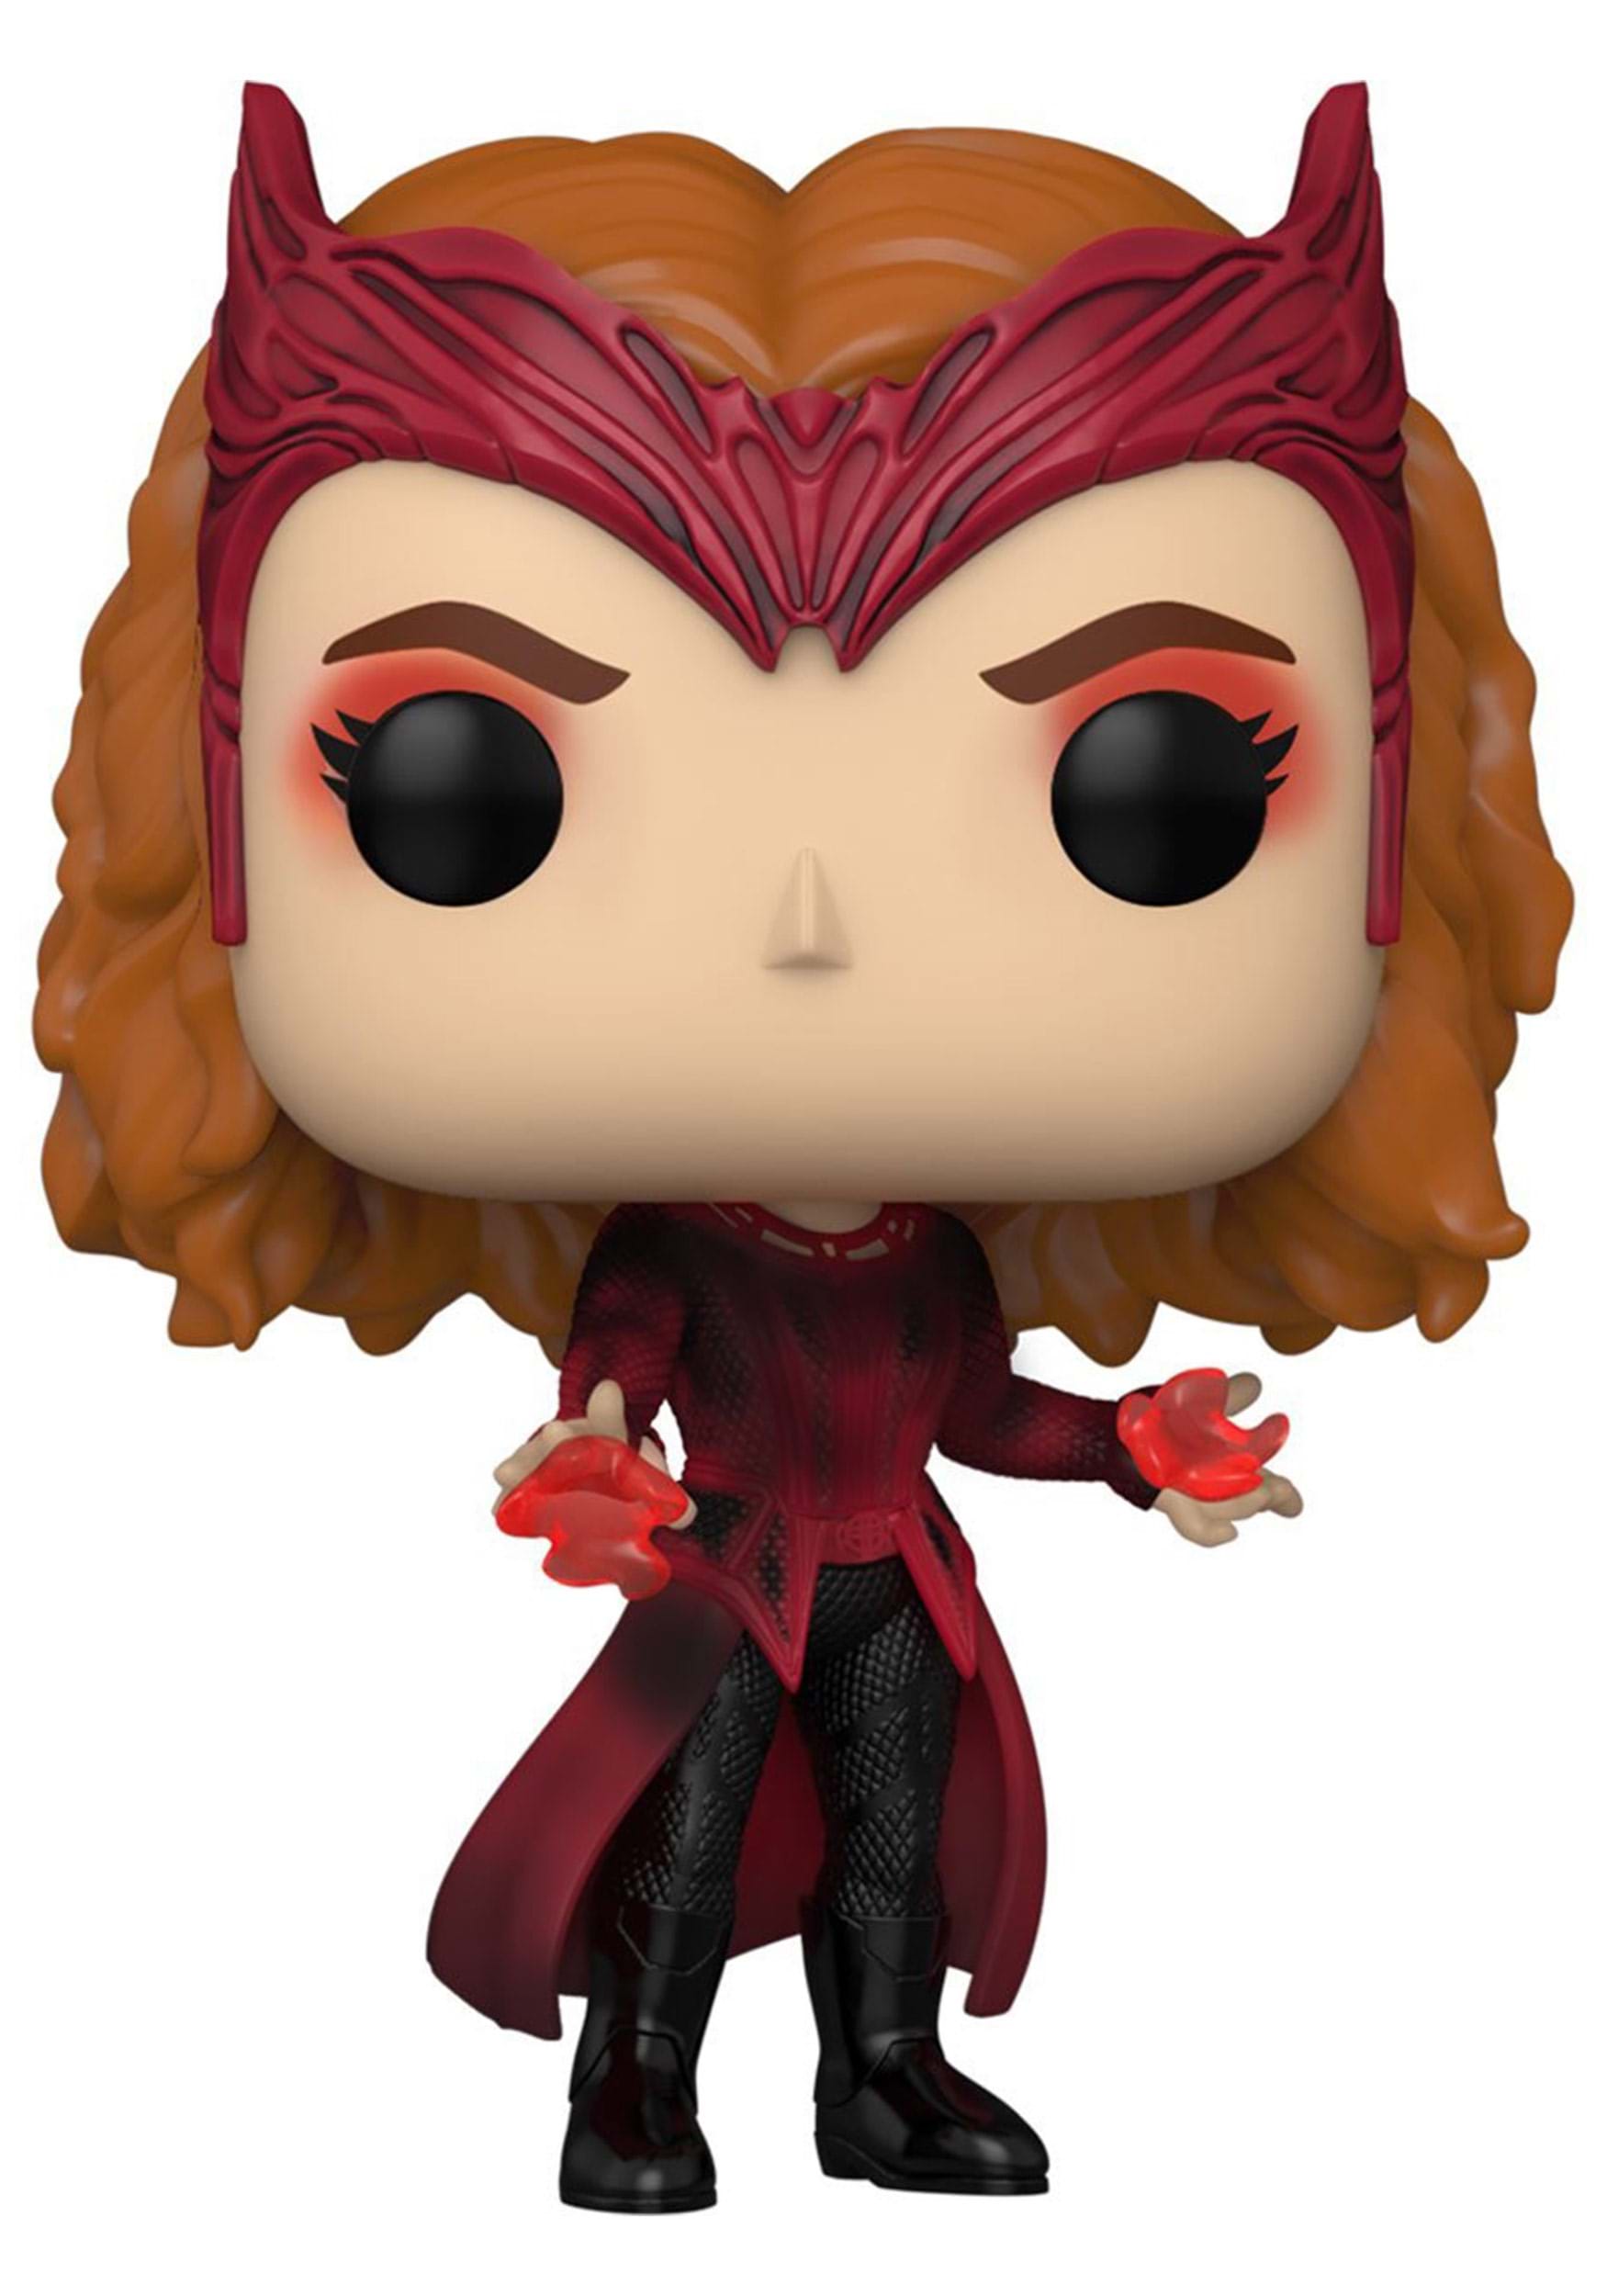 POP! Marvel: Doctor Strange in the Multiverse of Madness - Scarlet Witch